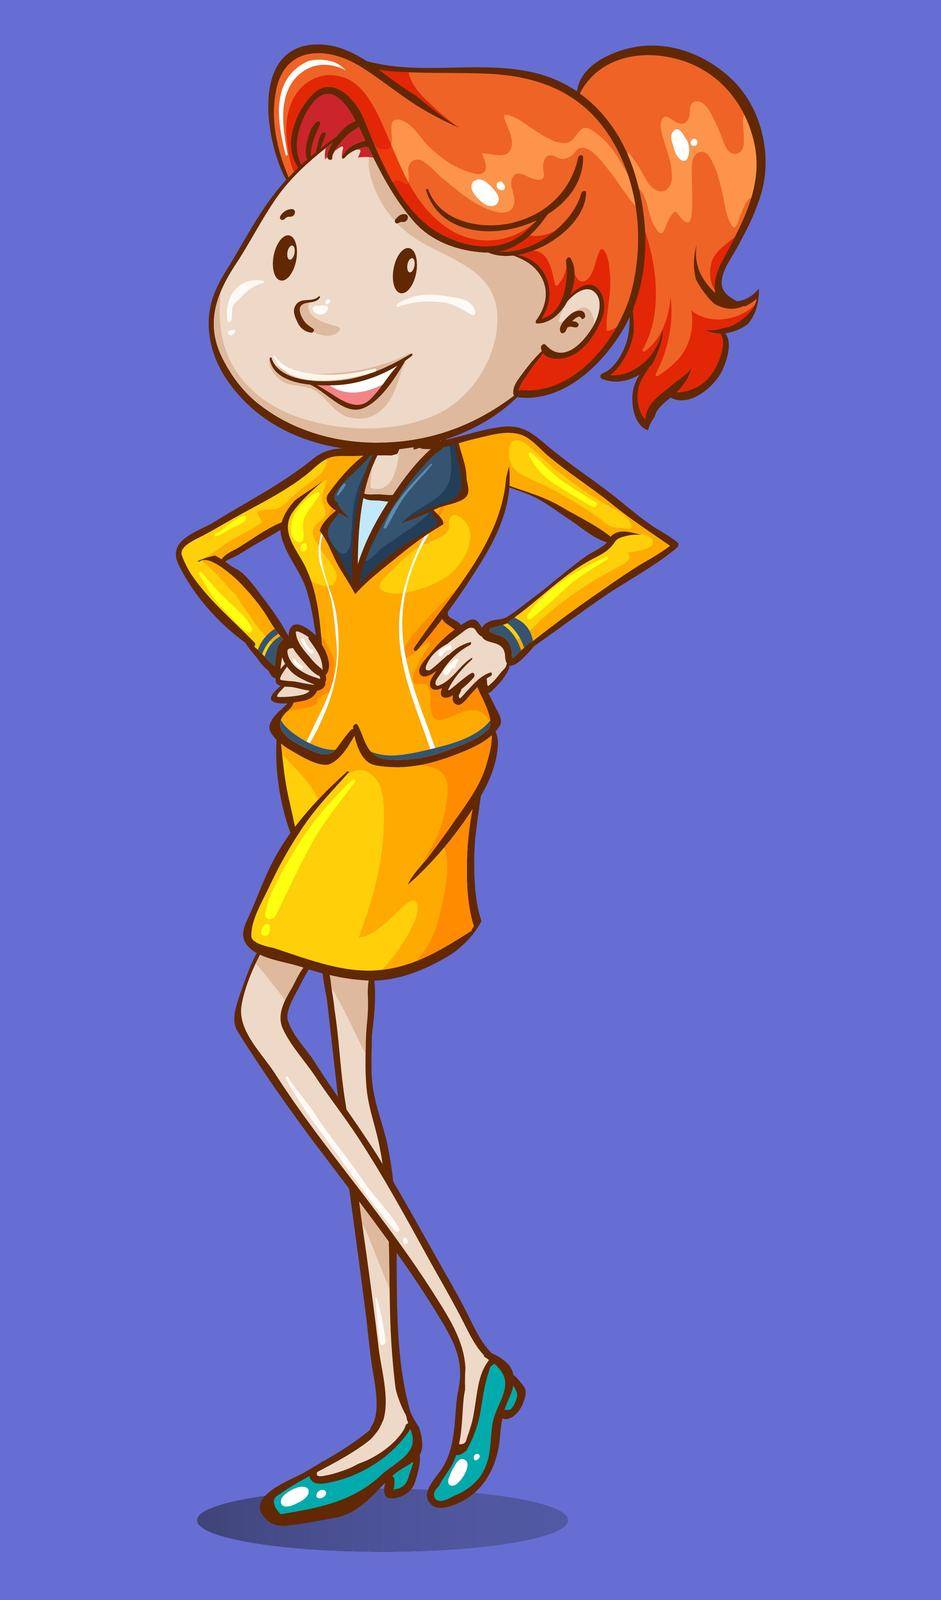 Business woman in yellow suit illustration